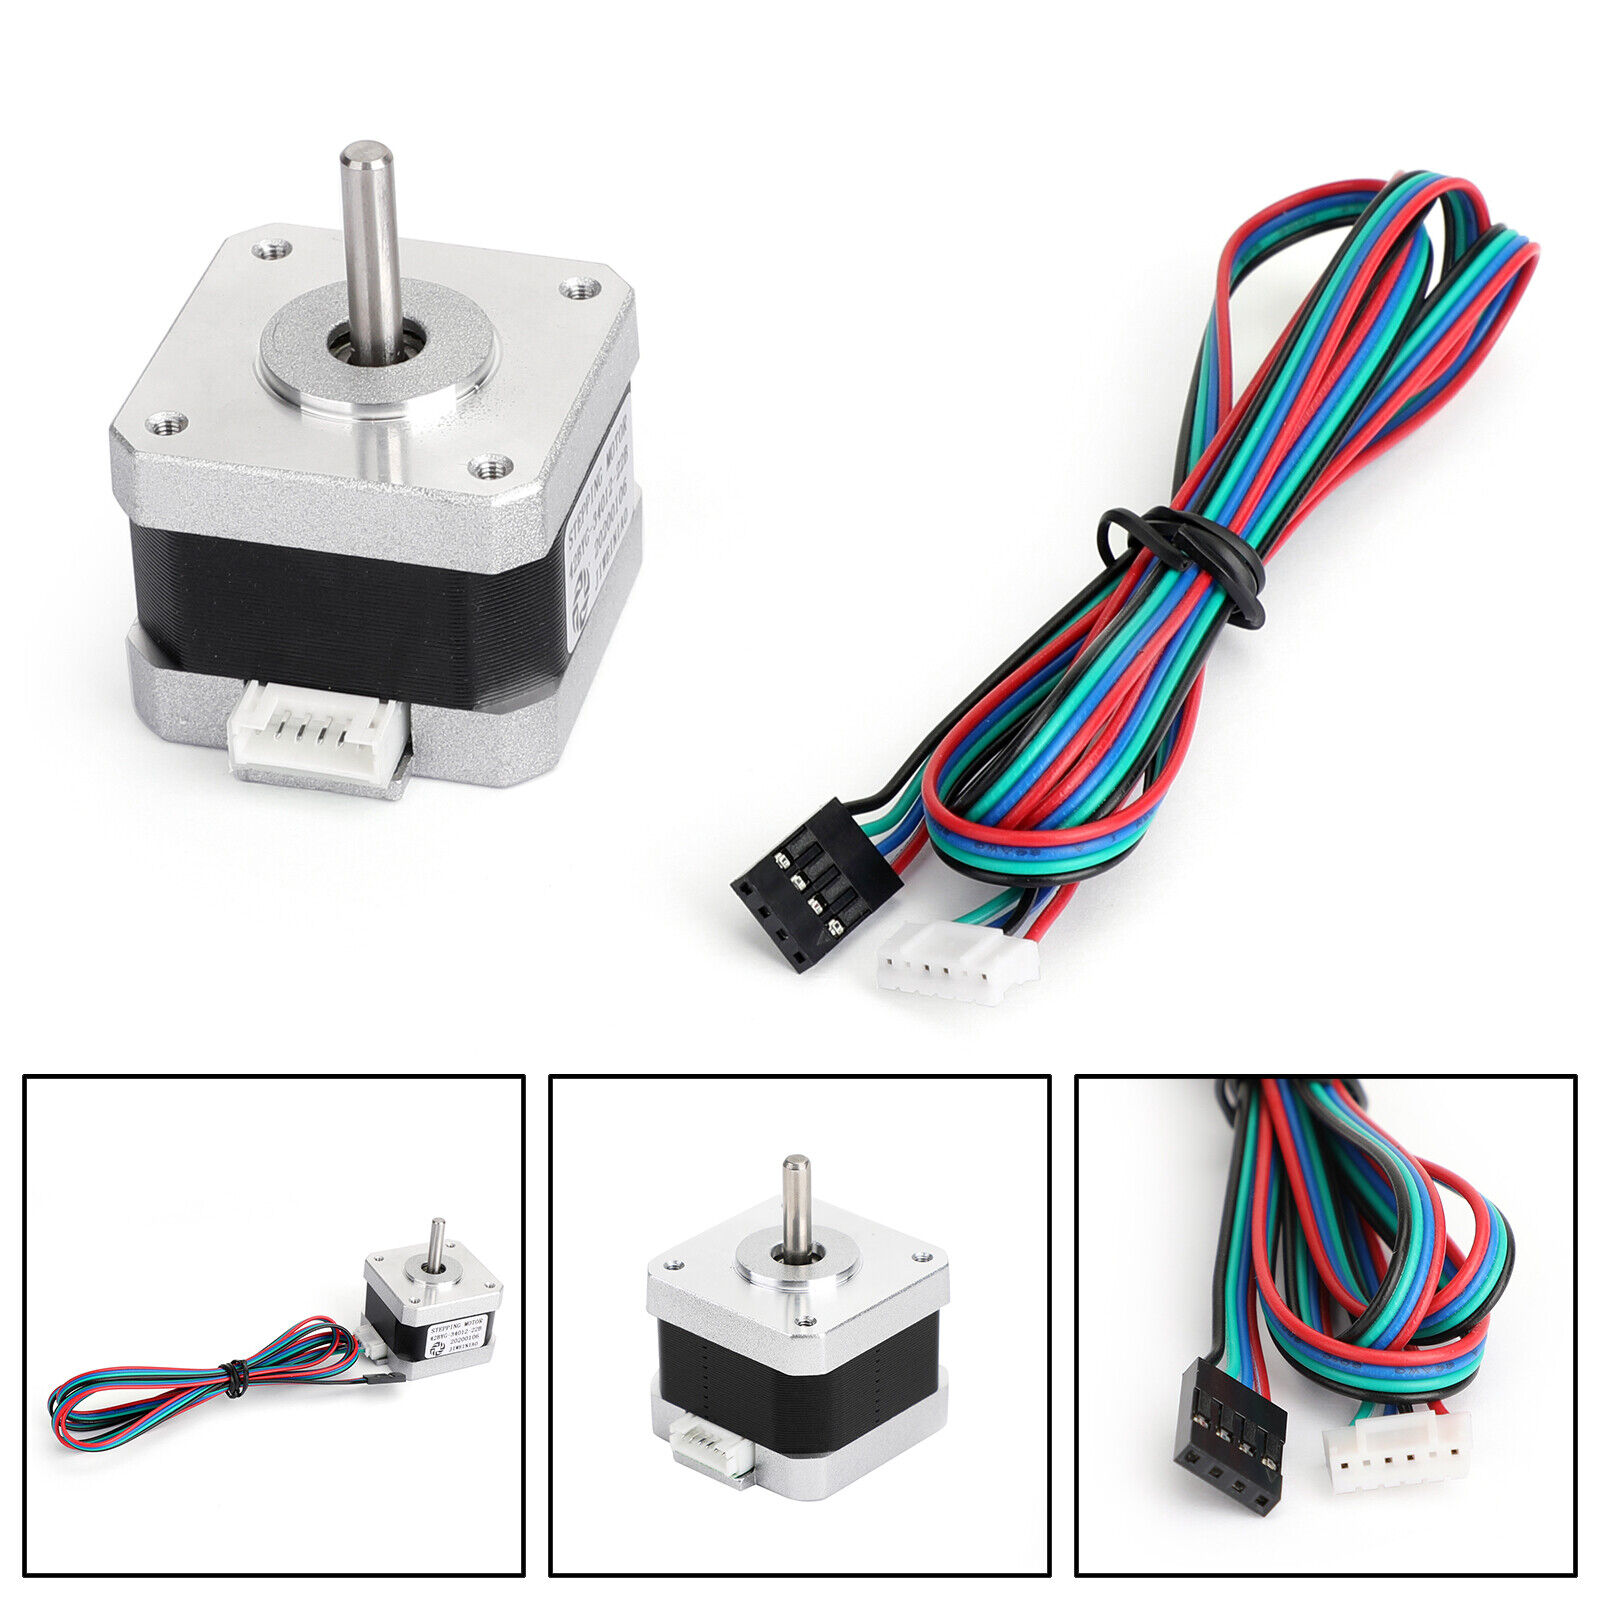 3D Printer 42-34 0.8A X/Y/Z-axis Stepper Motor For 3D Creality Ender 3 Pro UE